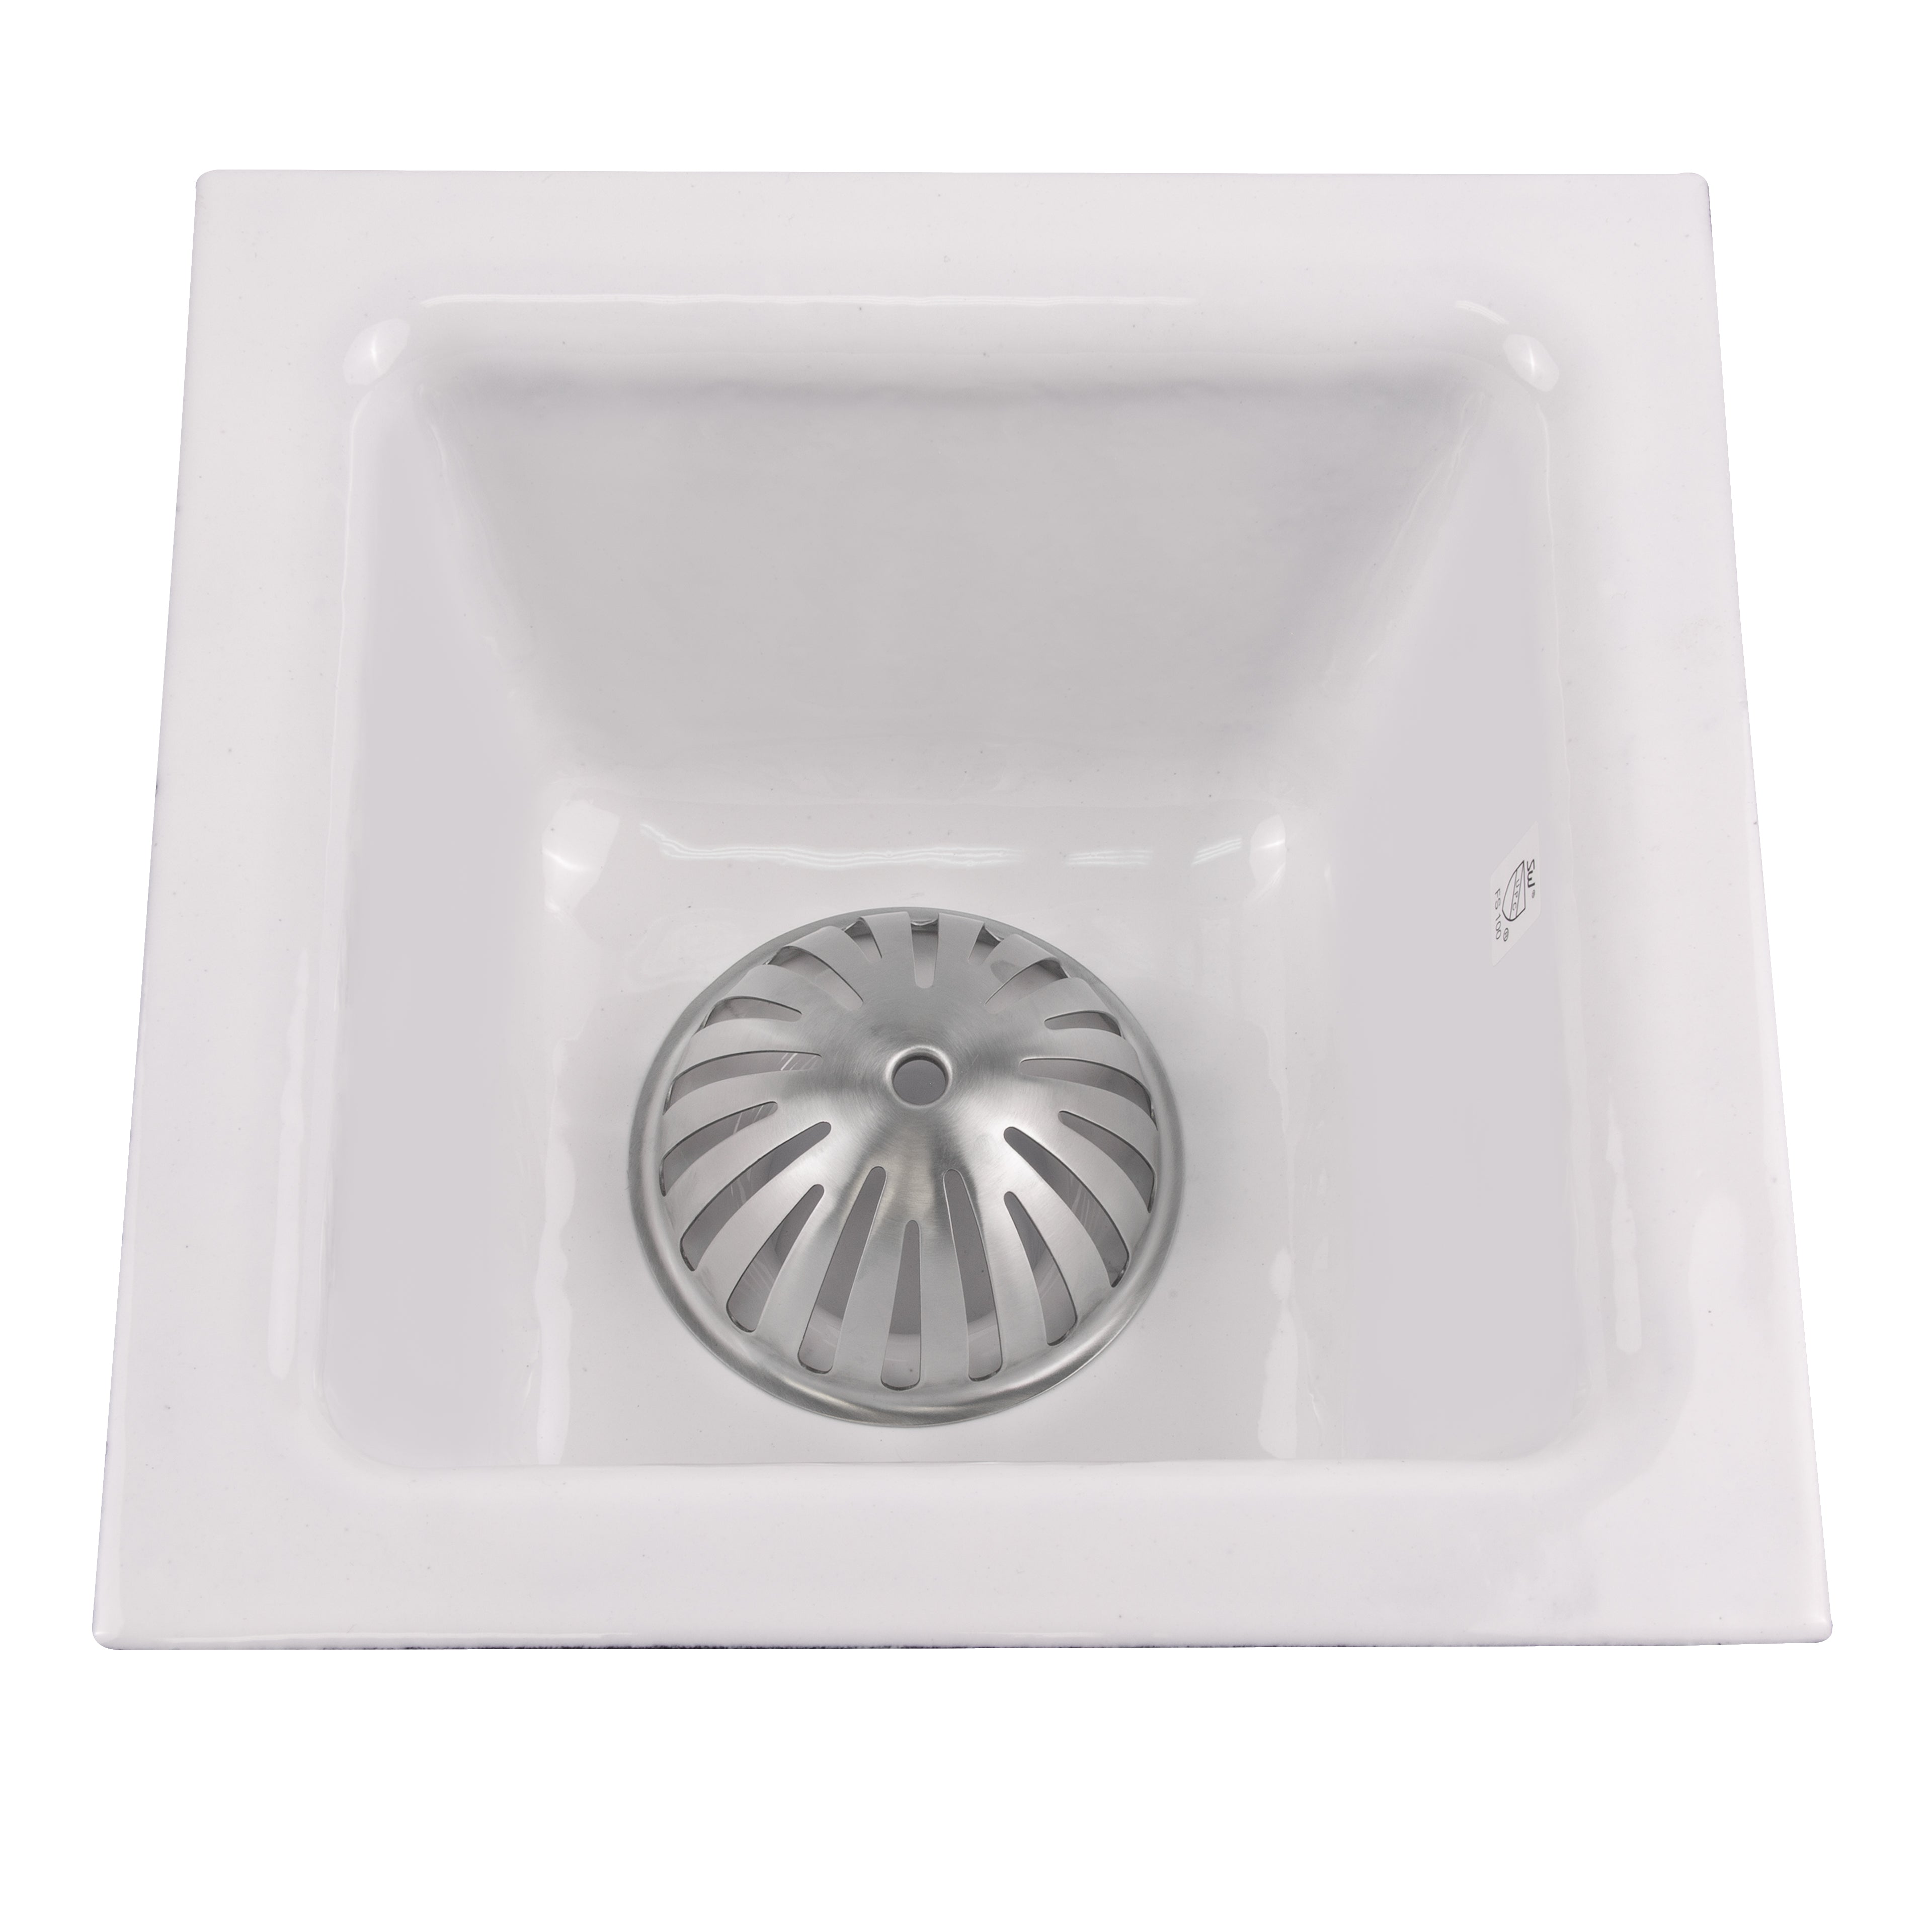 Replacement Dome Strainer 5 for floor sink drains - Drain-Net